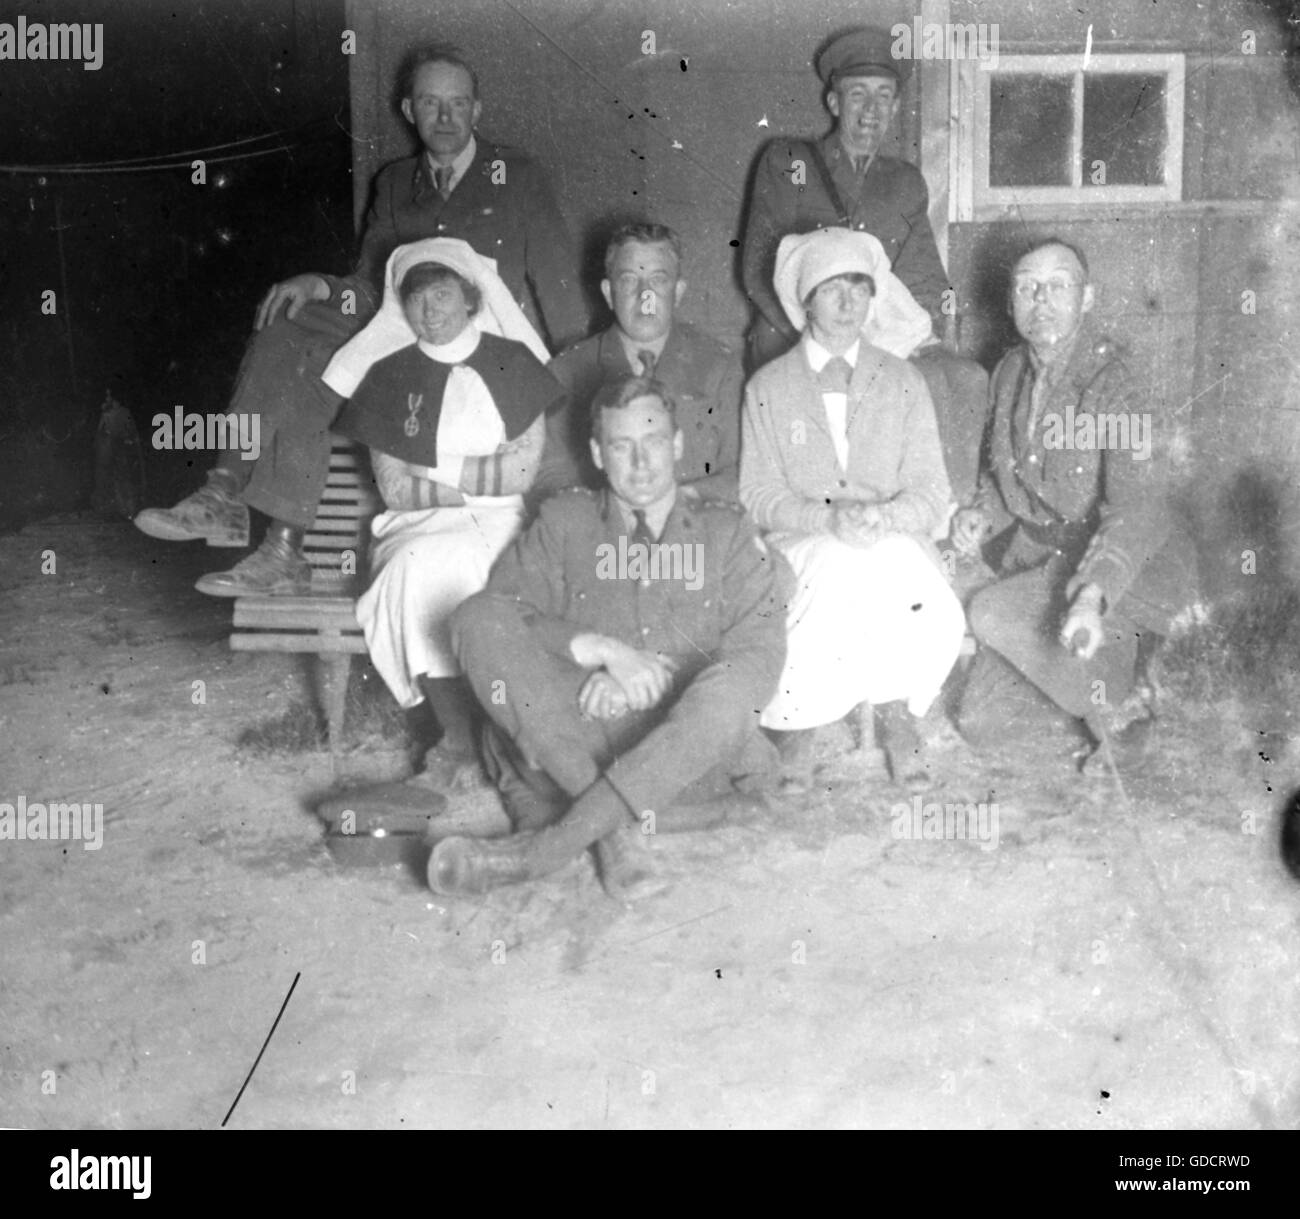 Scenes at the end of the 1st World War c1918/1919  Members of the RAMC including nurses pose for a flashed photo taken by the officer to the right - note the remote control device. This man is likely to be the author of this set of photographs.  Photo by Tony Henshaw       Scanned direct from a stereo original negative from a rare archive record of original photography from a British Doctor photographing at the end of World War 1    © World copyright. Stock Photo